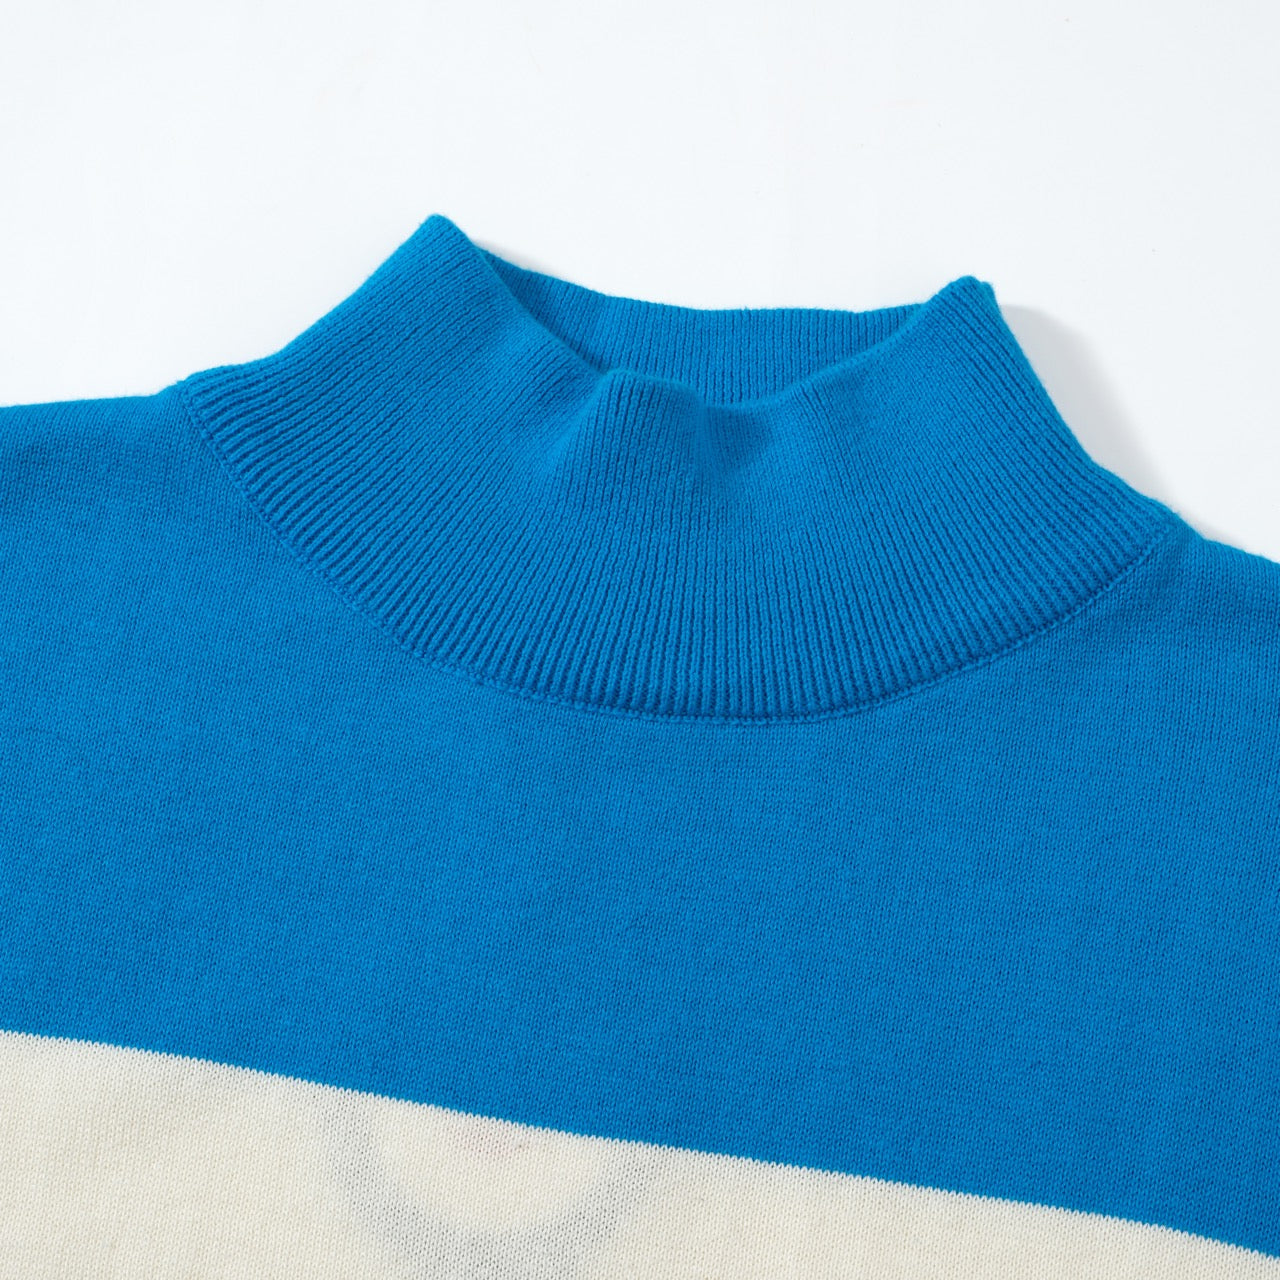 OXKNIT Men Vintage Clothing 1960s Mod Style Casual Racing Jumper Blue Knitwear High Neck Retro Tshirt